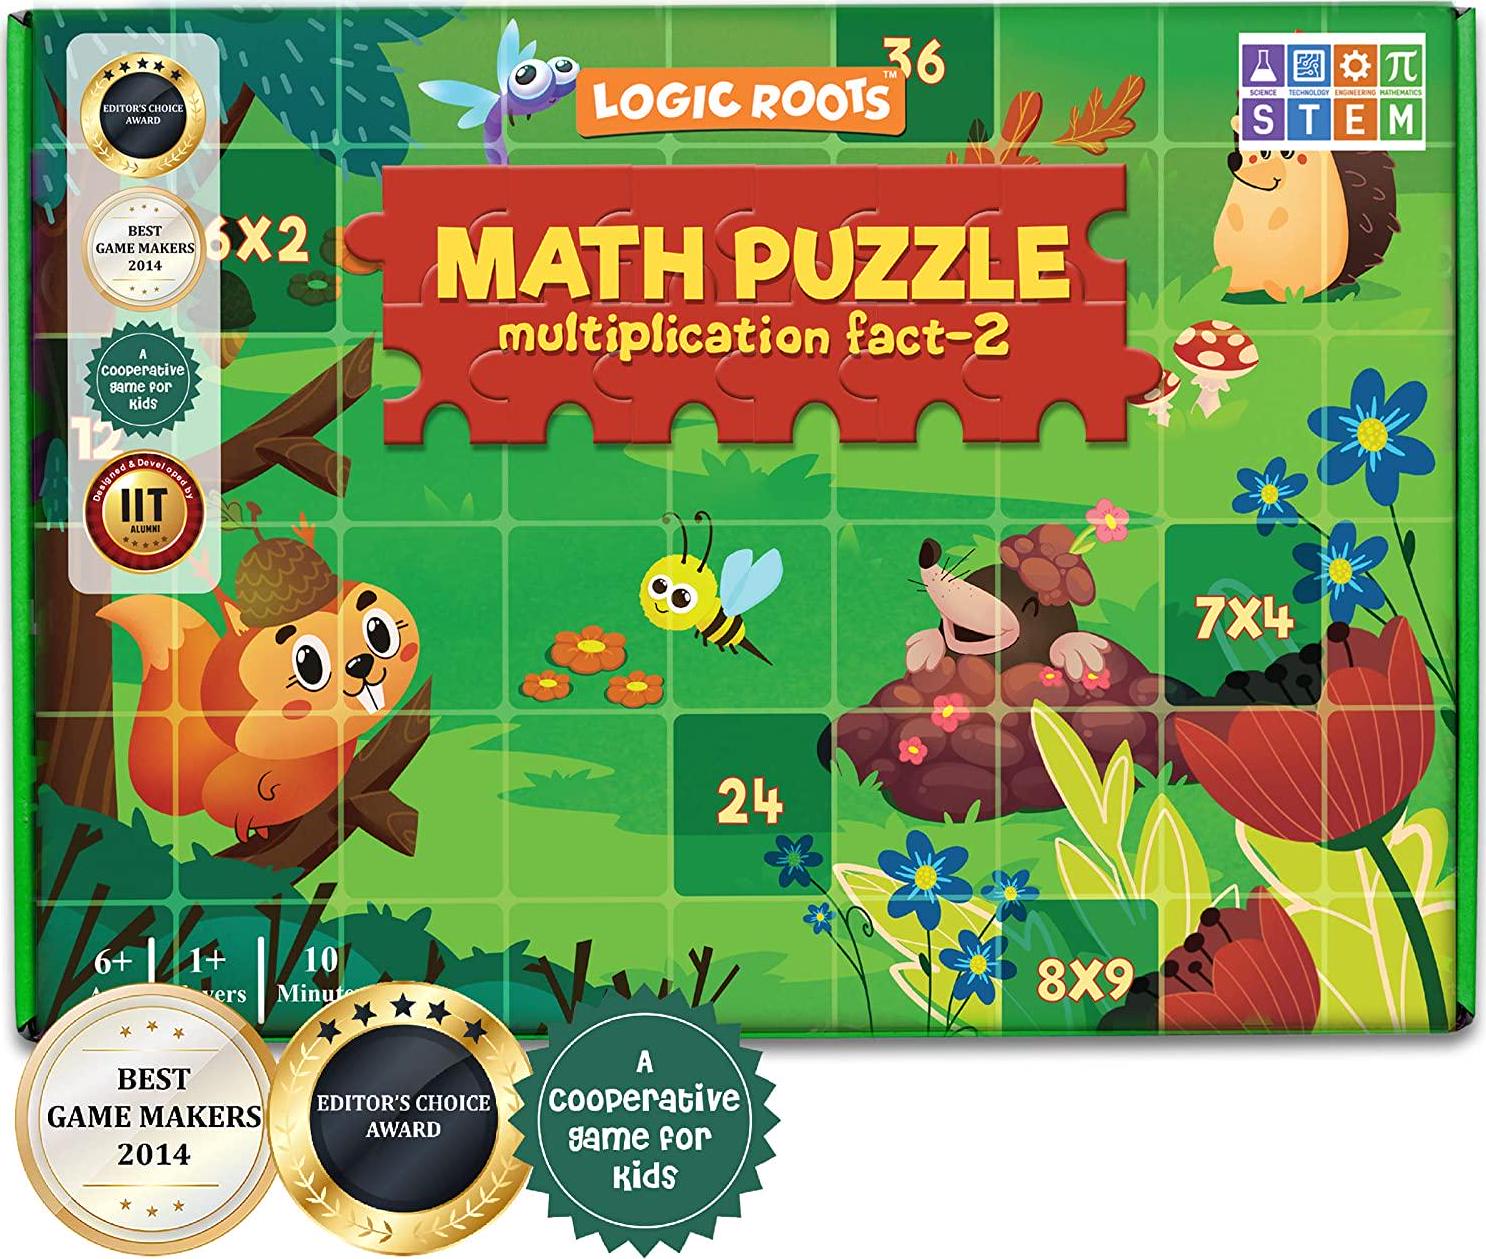 Logic Roots, Logic Roots Math Puzzle for Kids - Multiplication Table 6-9 Practice, Fun STEM Toy for 5 - 8 Year Olds, 4 Foam Puzzles with 12 Pieces Each, Learning Gift for Kids, Homeschoolers, Grade 1 and Up